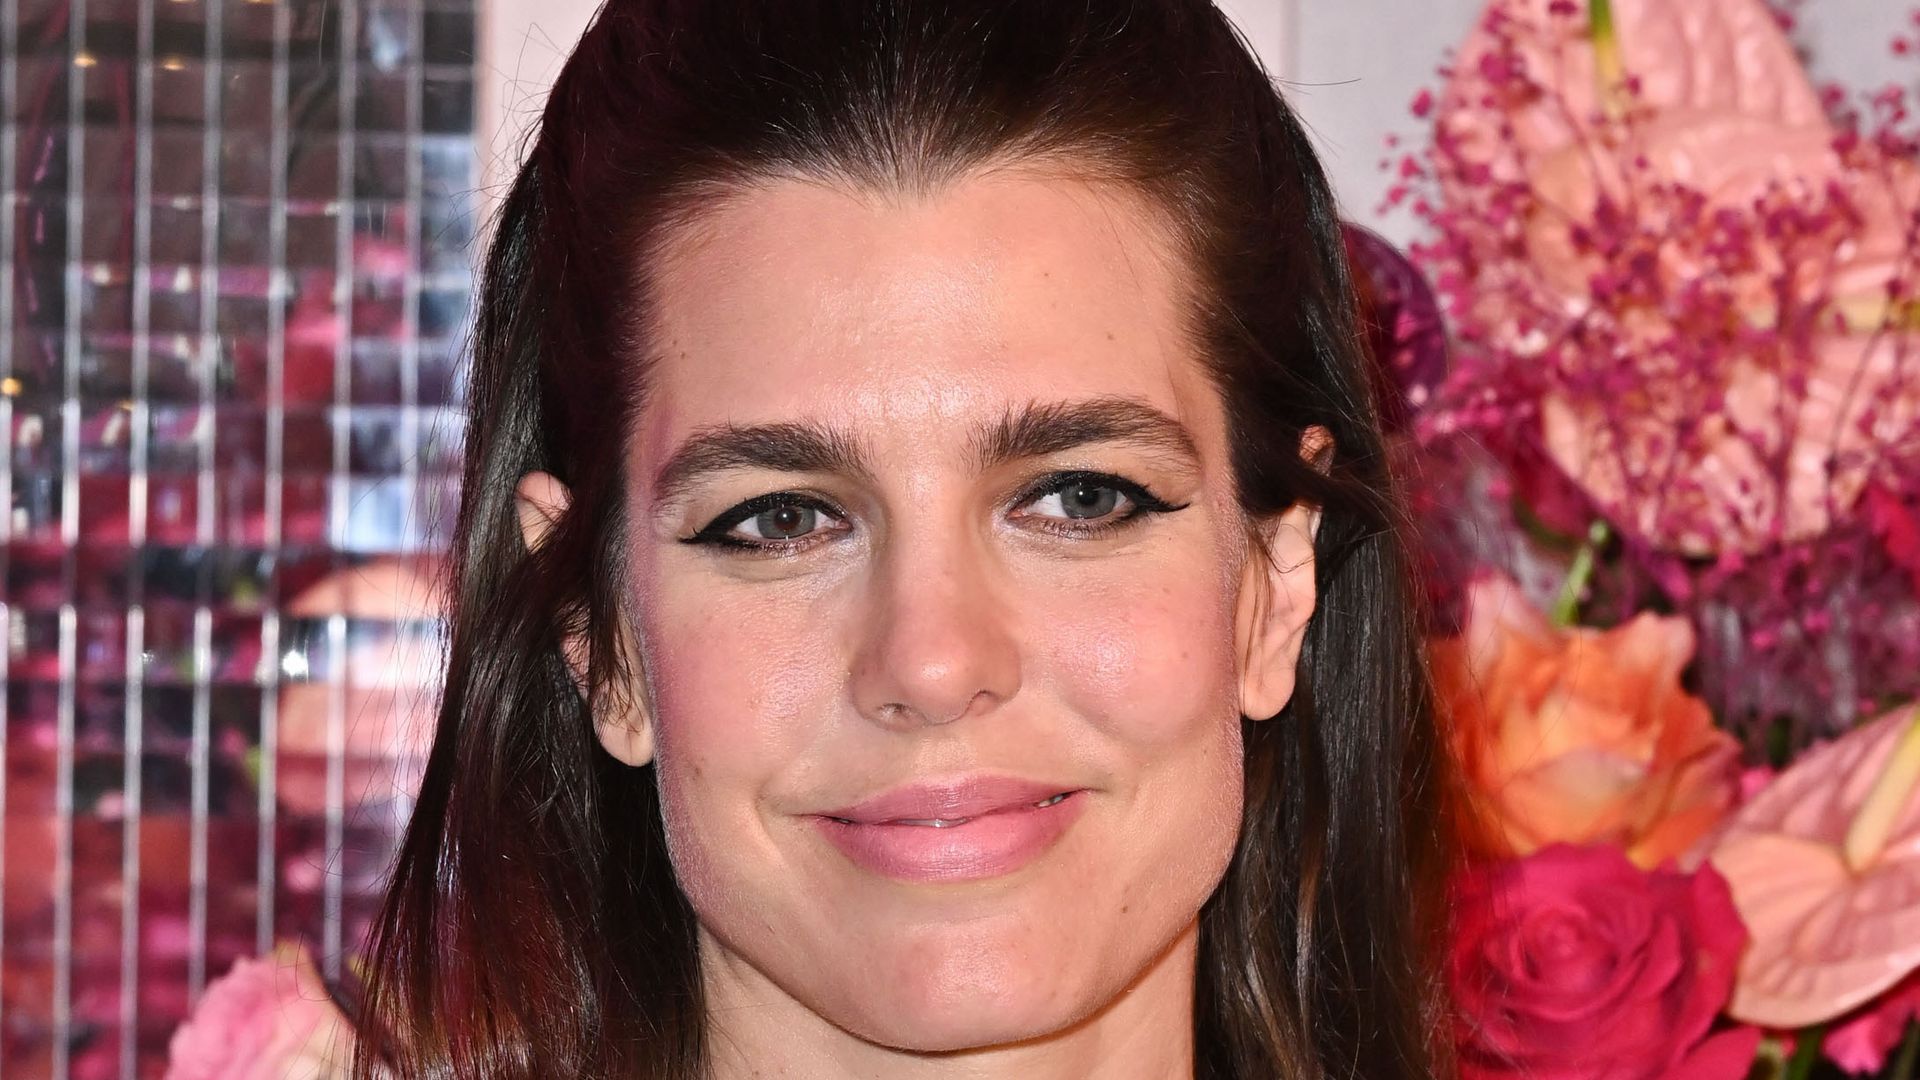 Charlotte Casiraghi dazzles in sequin slip dress with dramatic split at star-studded royal gala